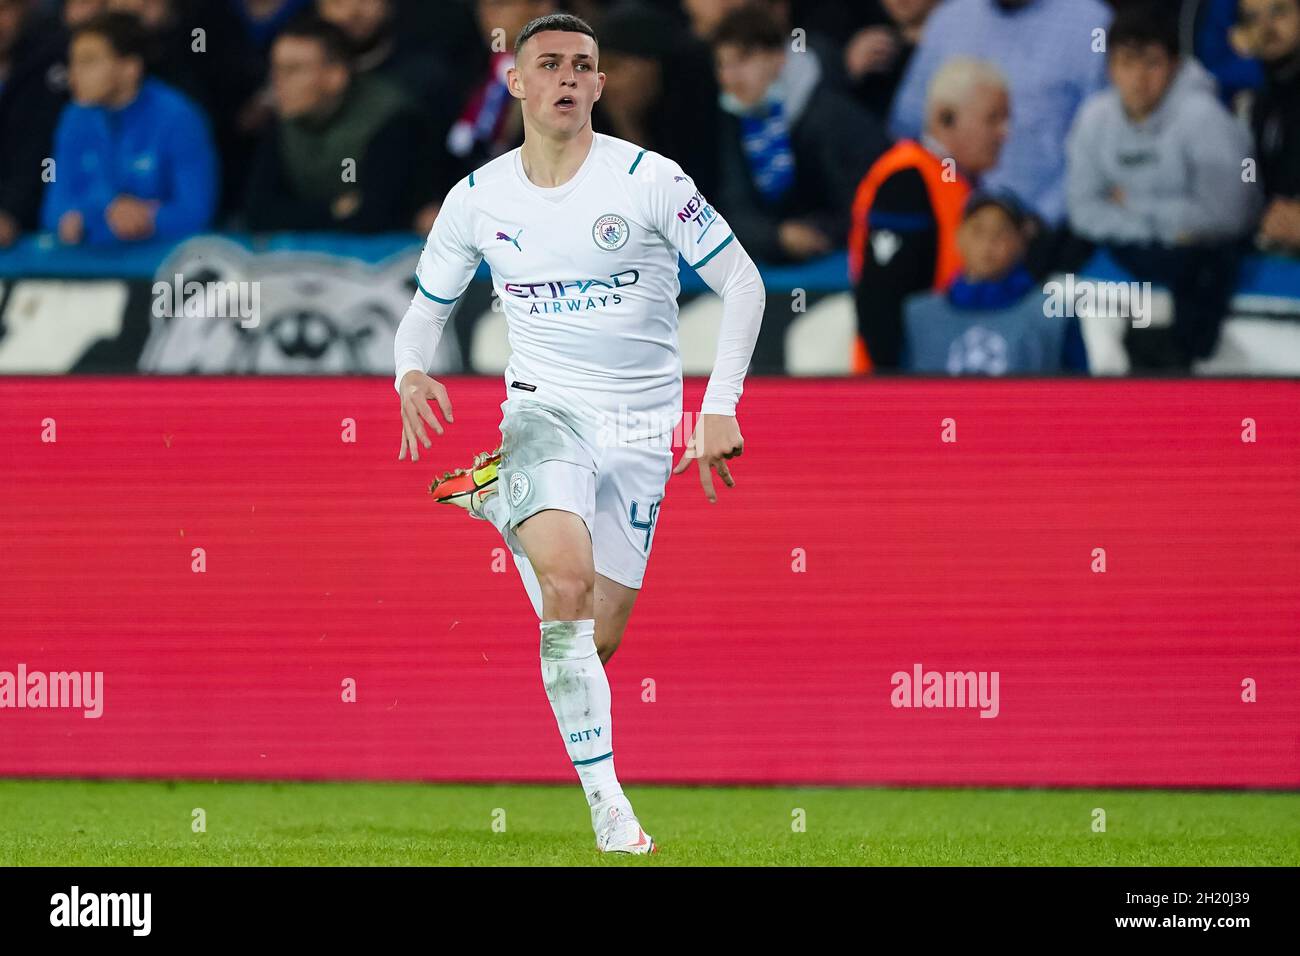 BRUGGE, BELGIUM - OCTOBER 19: Phil Foden of Manchester City during the Group A - UEFA Champions League match between Club Brugge KV and Manchester City at Jan Breydelstadion on October 19, 2021 in Brugge, Belgium (Photo by Jeroen Meuwsen/Orange Pictures) Stock Photo